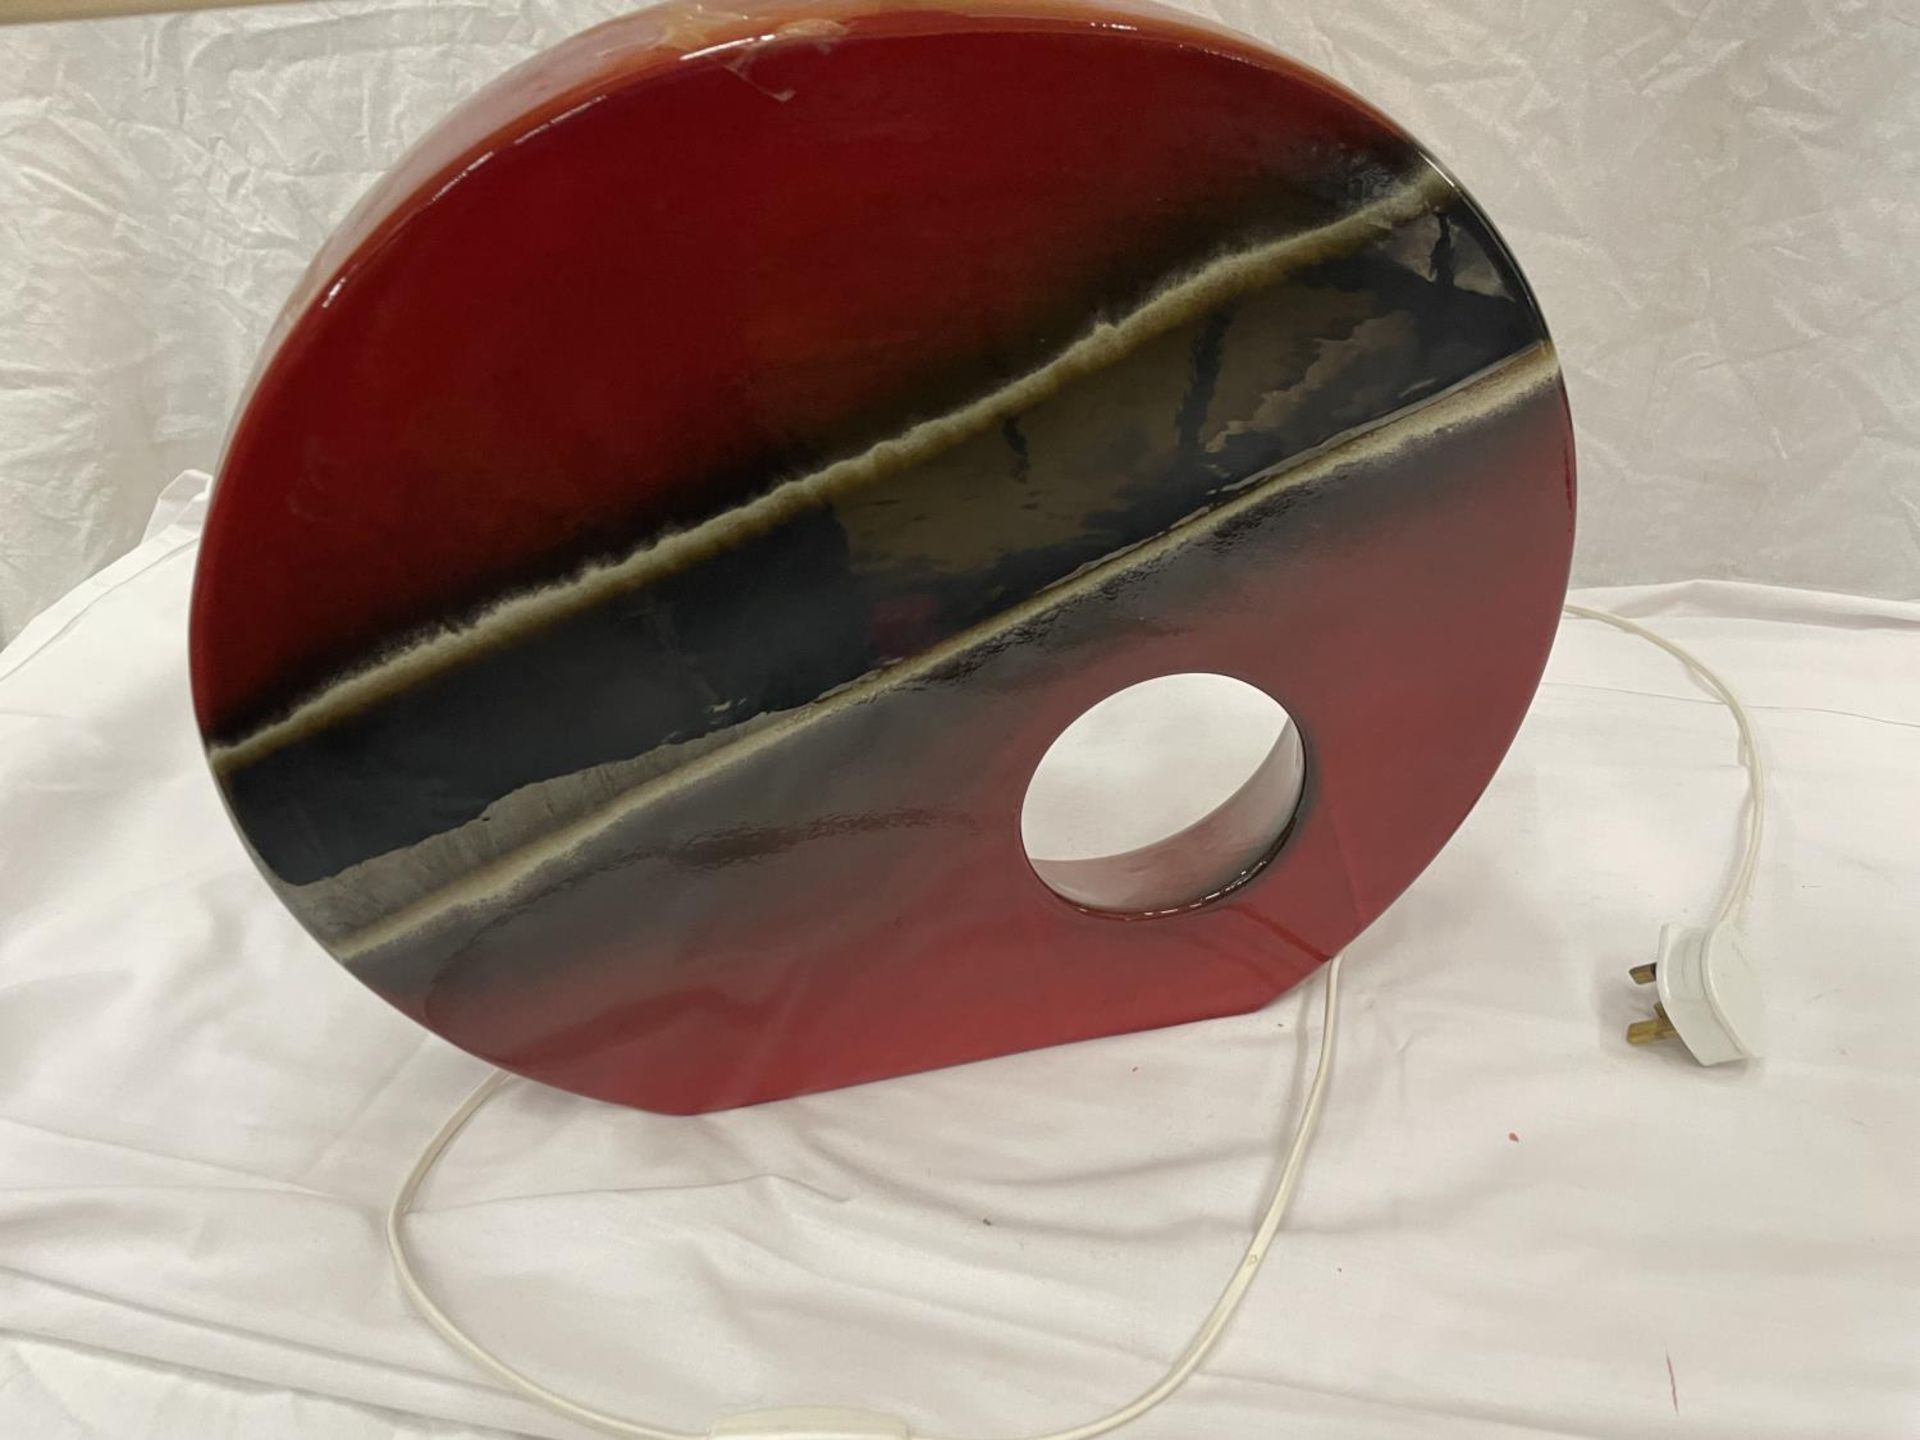 A VERY LARGE ART SCULPTURE ROUND RED LAMP WITH SHADE HEIGHT 40CM, WIDTH 47CM - Image 5 of 6